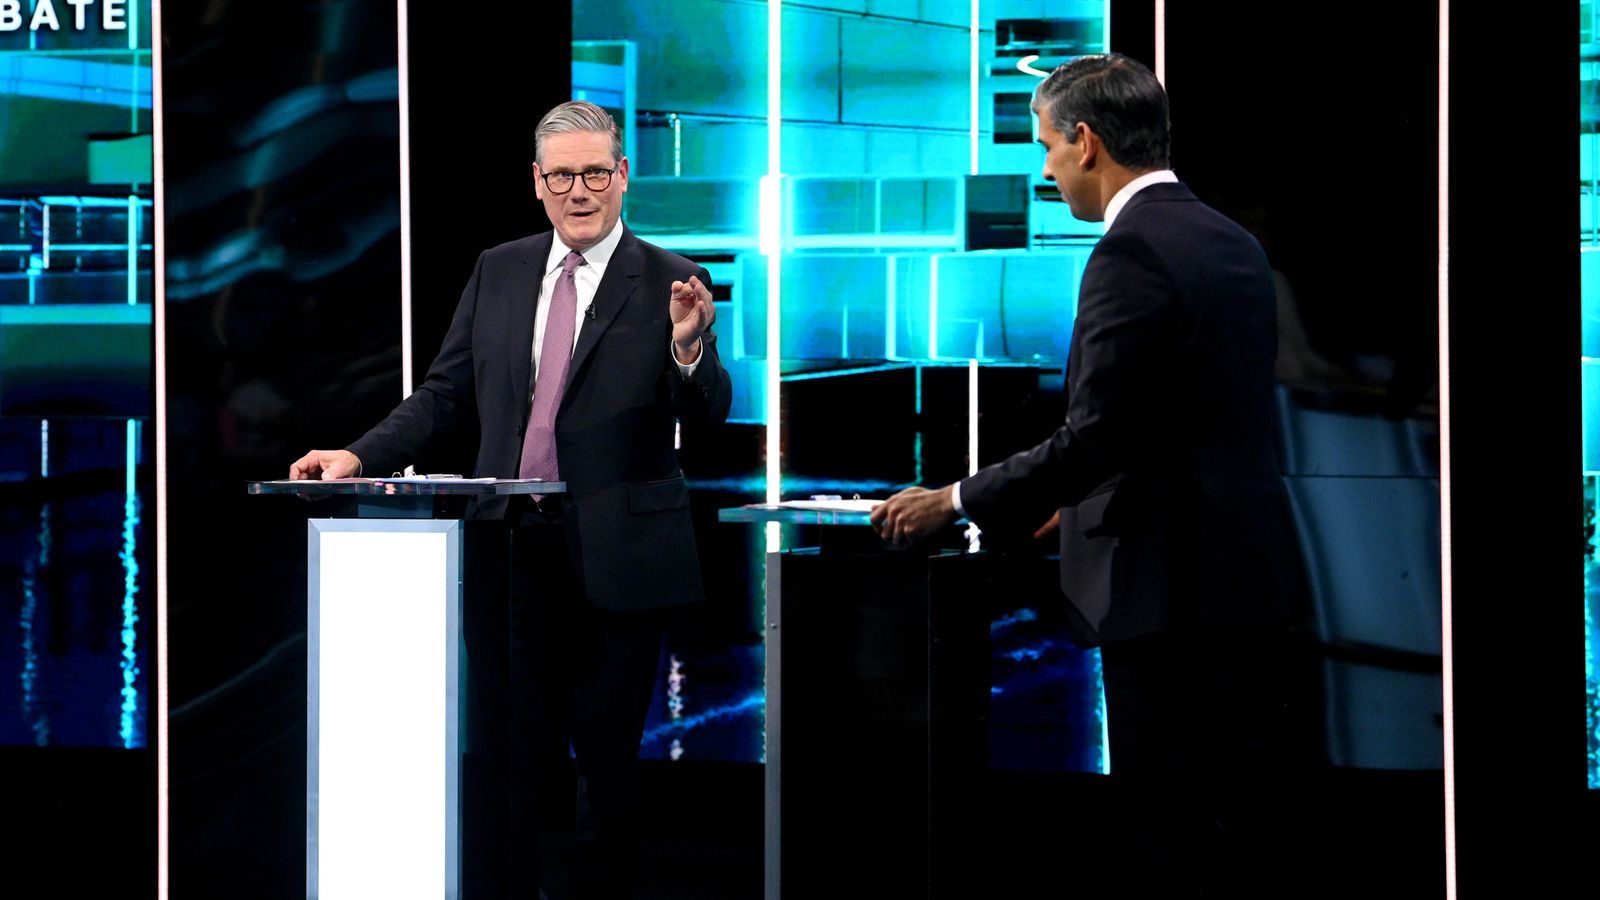 How leaders prepare for debates – and the dos and don'ts for Sunak and Starmer tonight